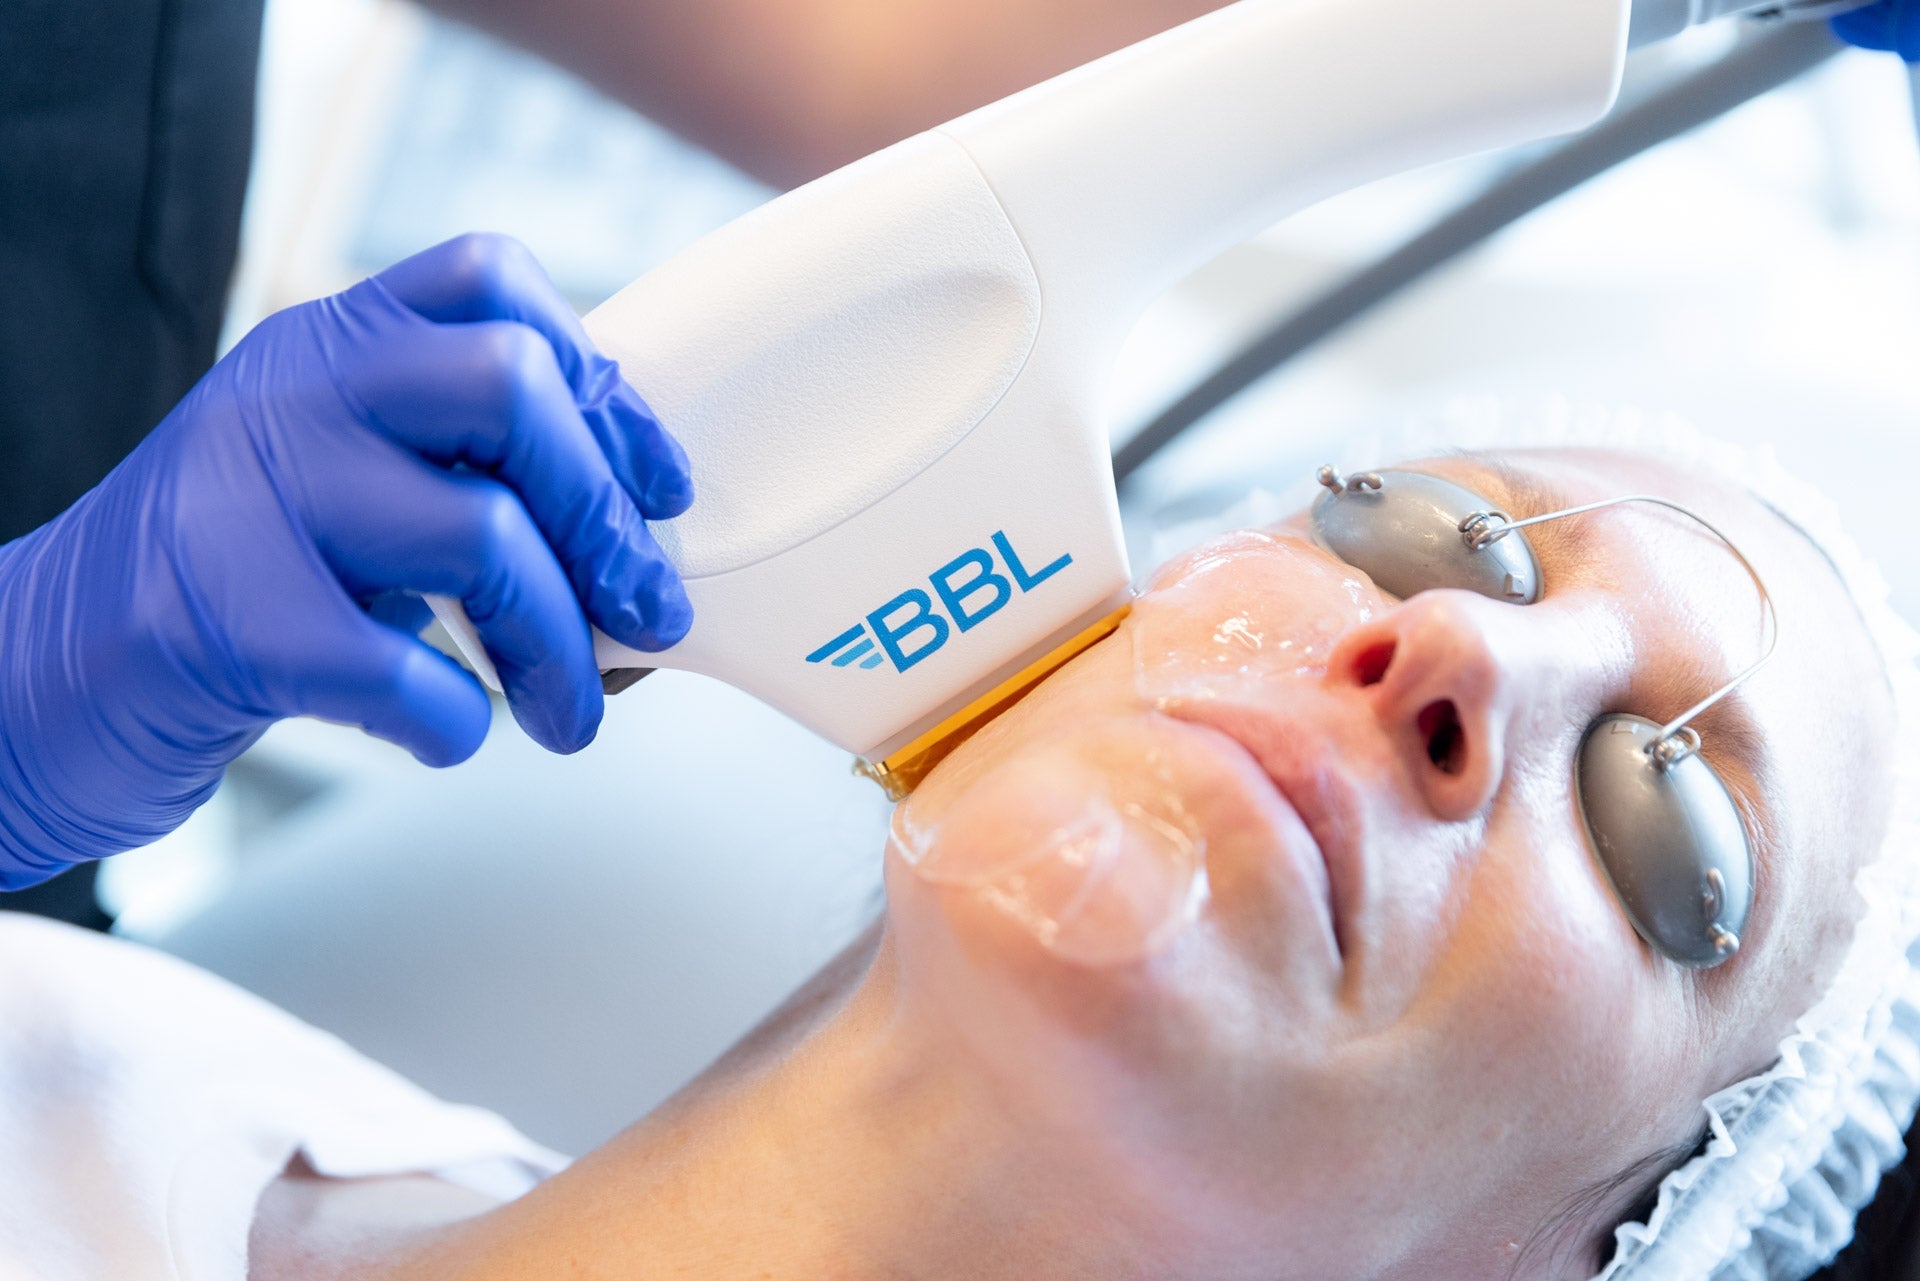 Platinum Skin Rejuvenation Pack: BBL + MOXI + Microneedling + Peels for Face & Neck Course of 3 (save €2,001)